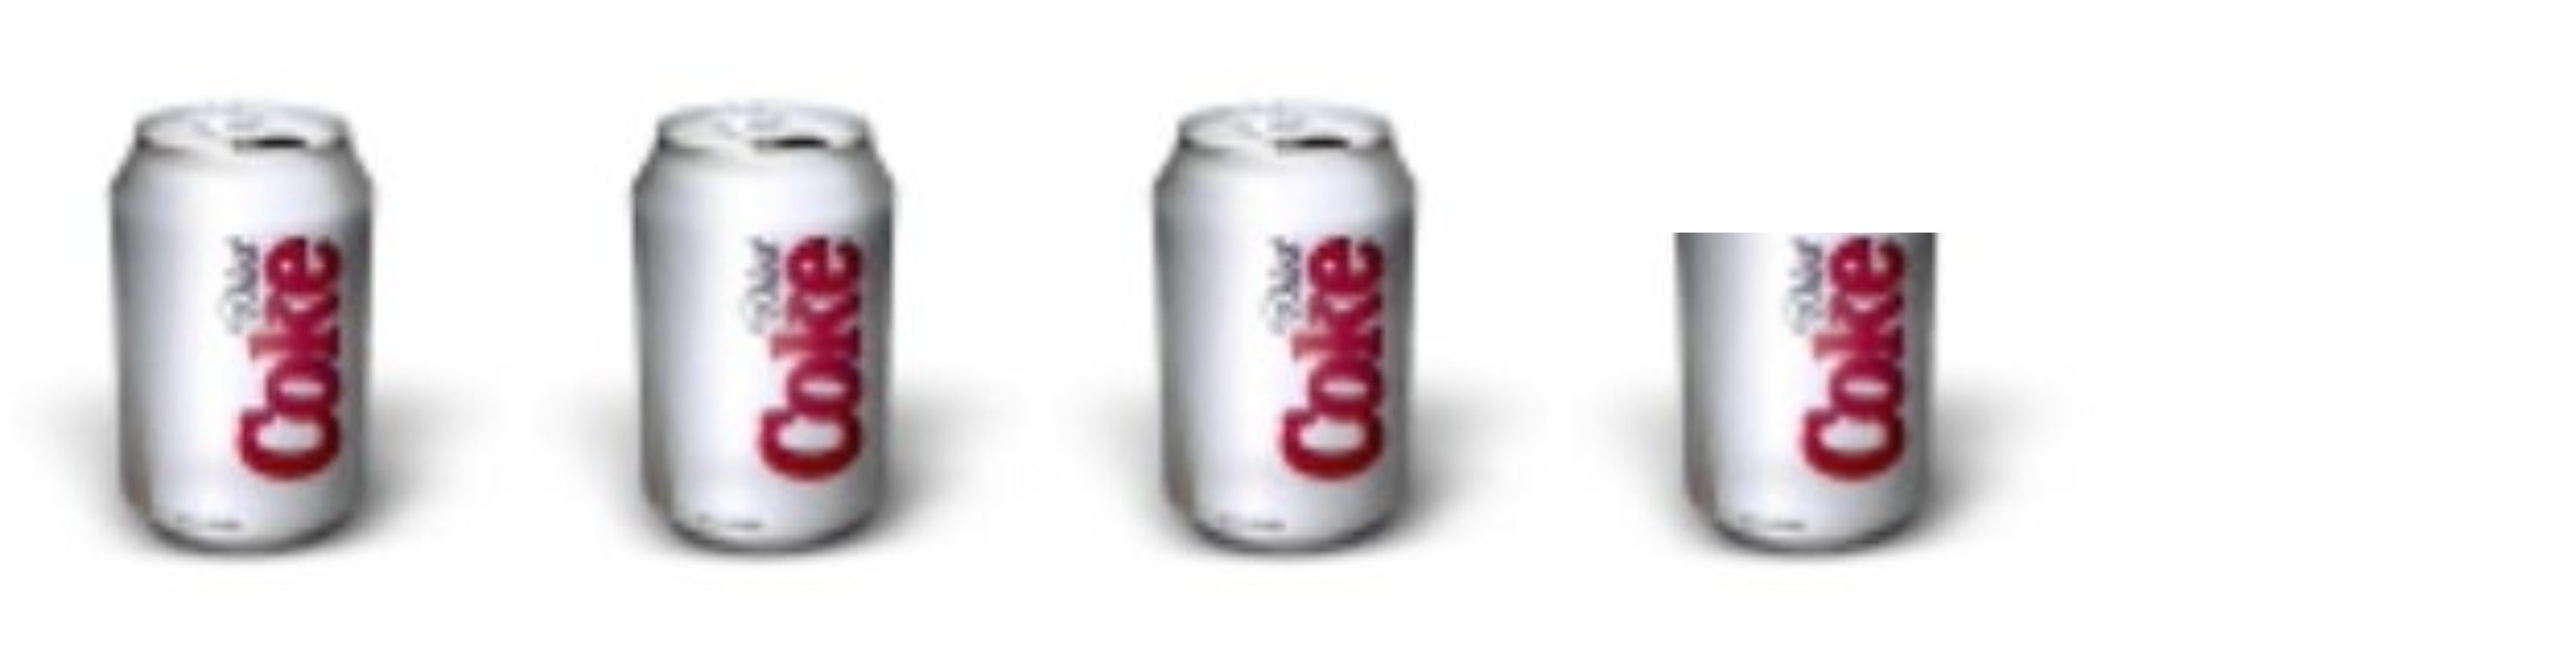 Three and four/fifths Diet Coke emojis representing rating stars